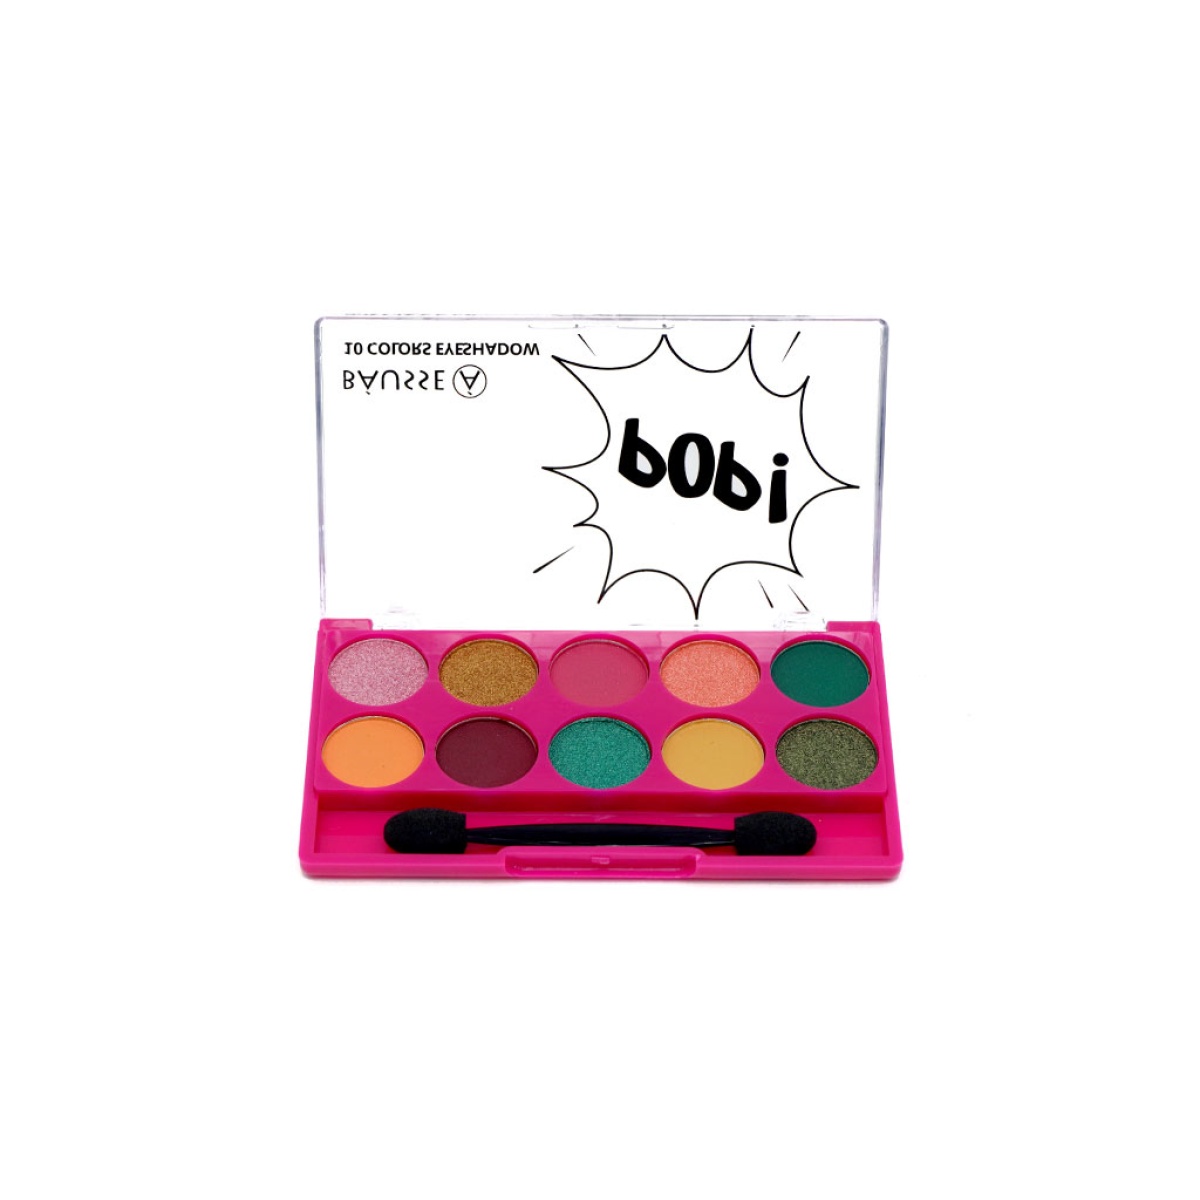 Eyeshadow palette 10 colores